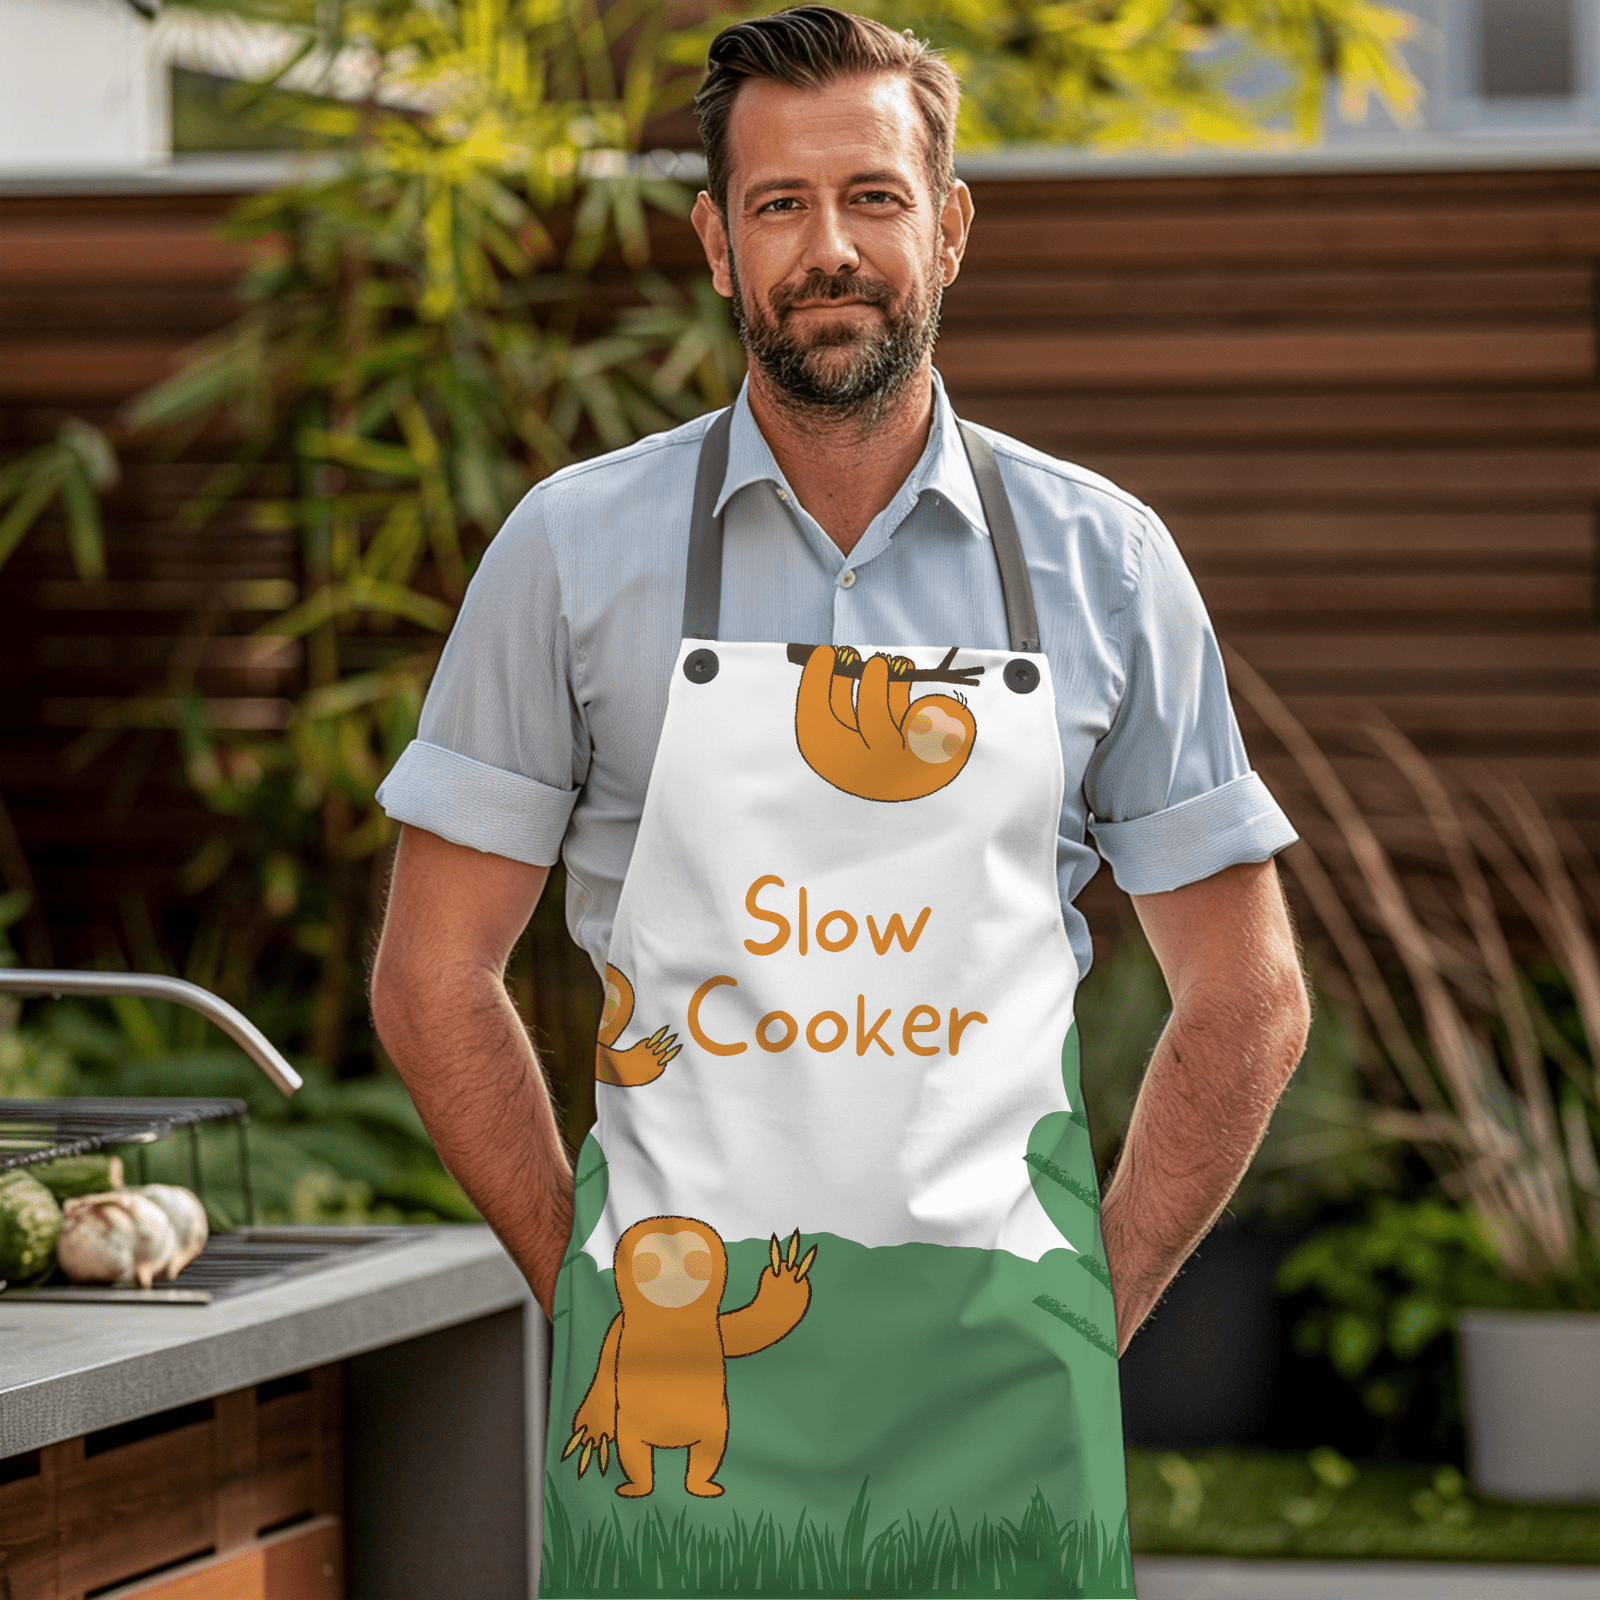 BBQ Apron for men as gift with slow cooker design